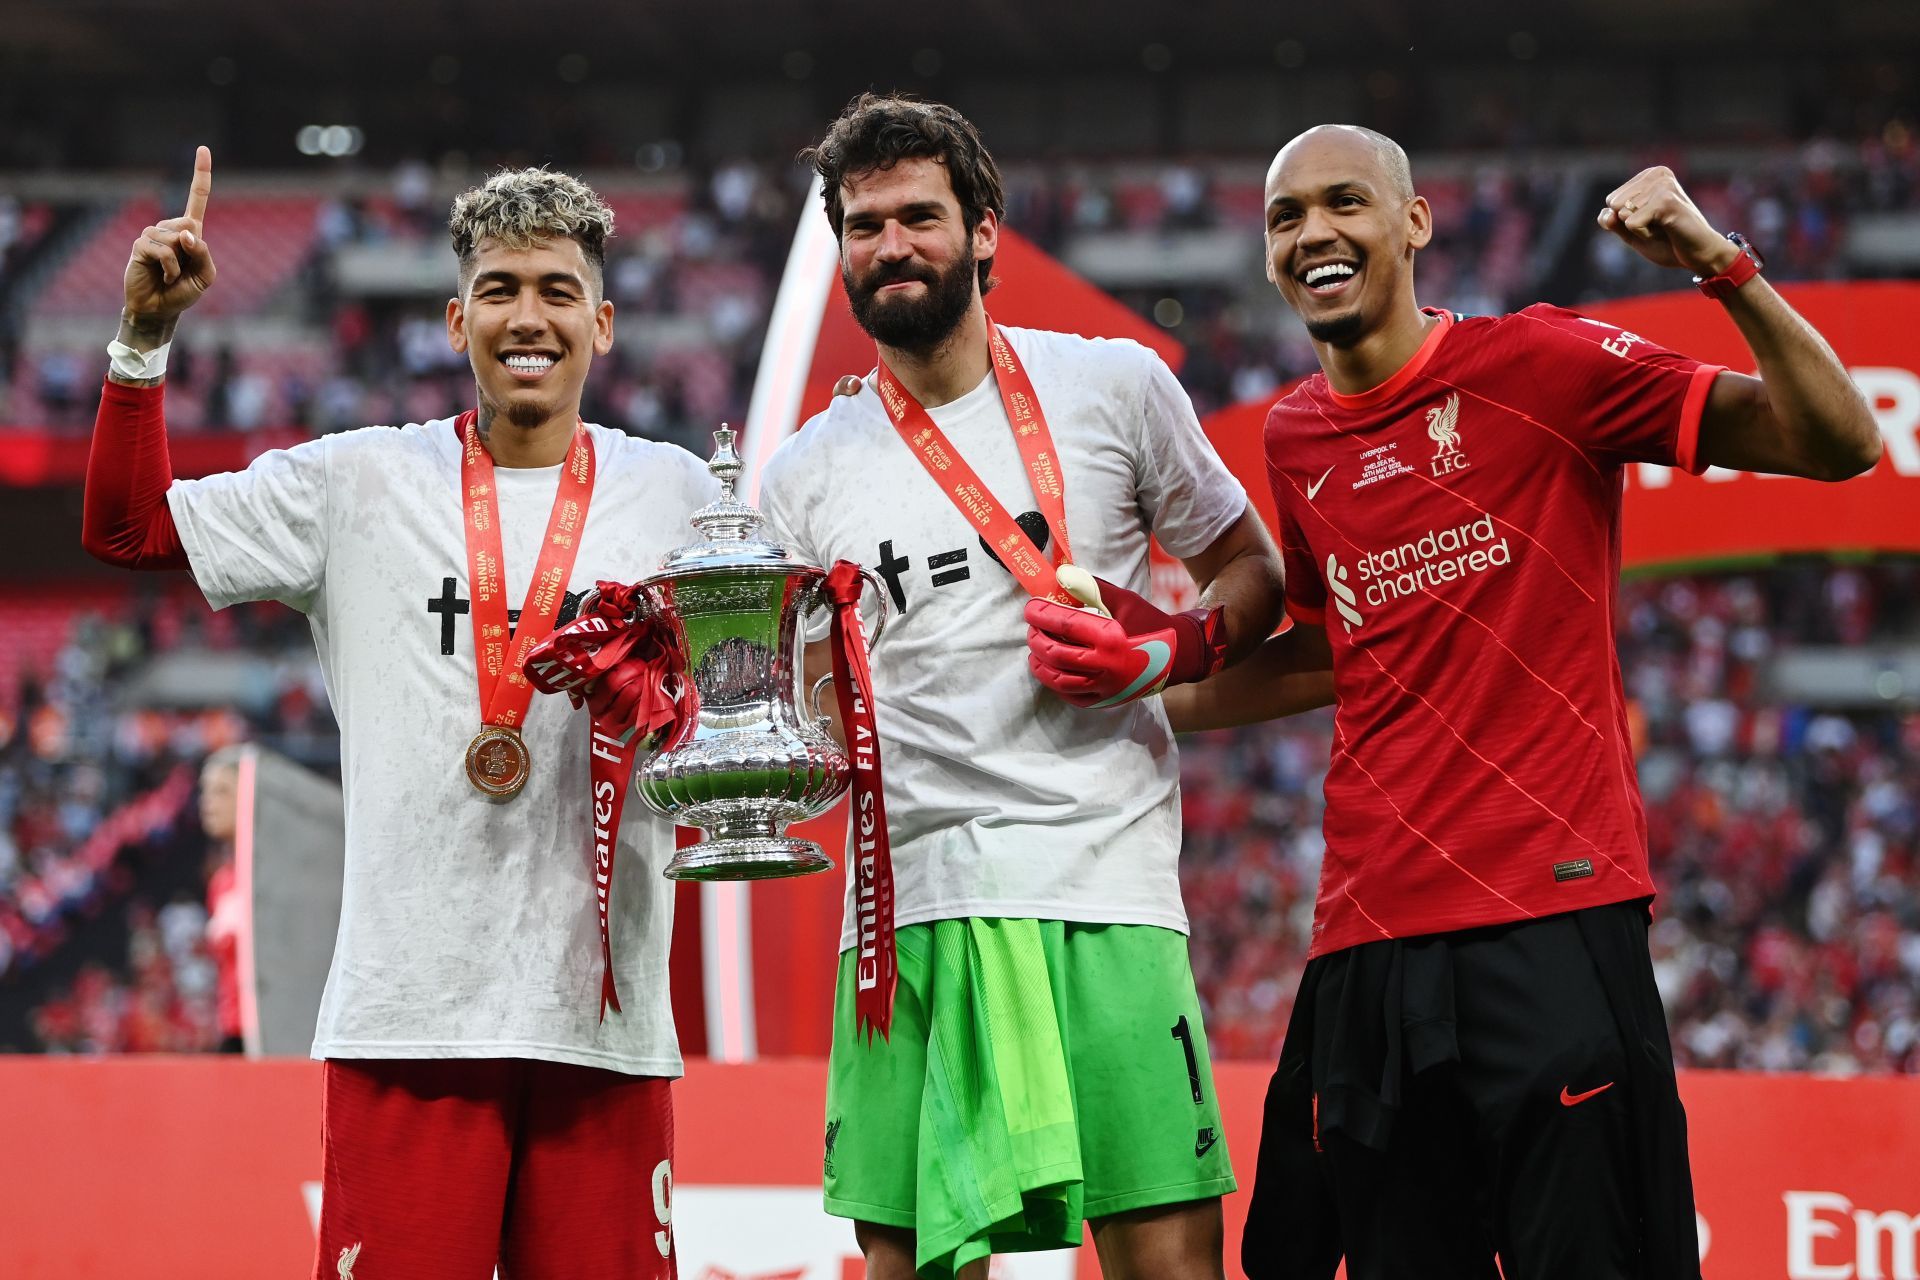 The Reds have claimed their second title of the season, keeping their quadruple hopes alive